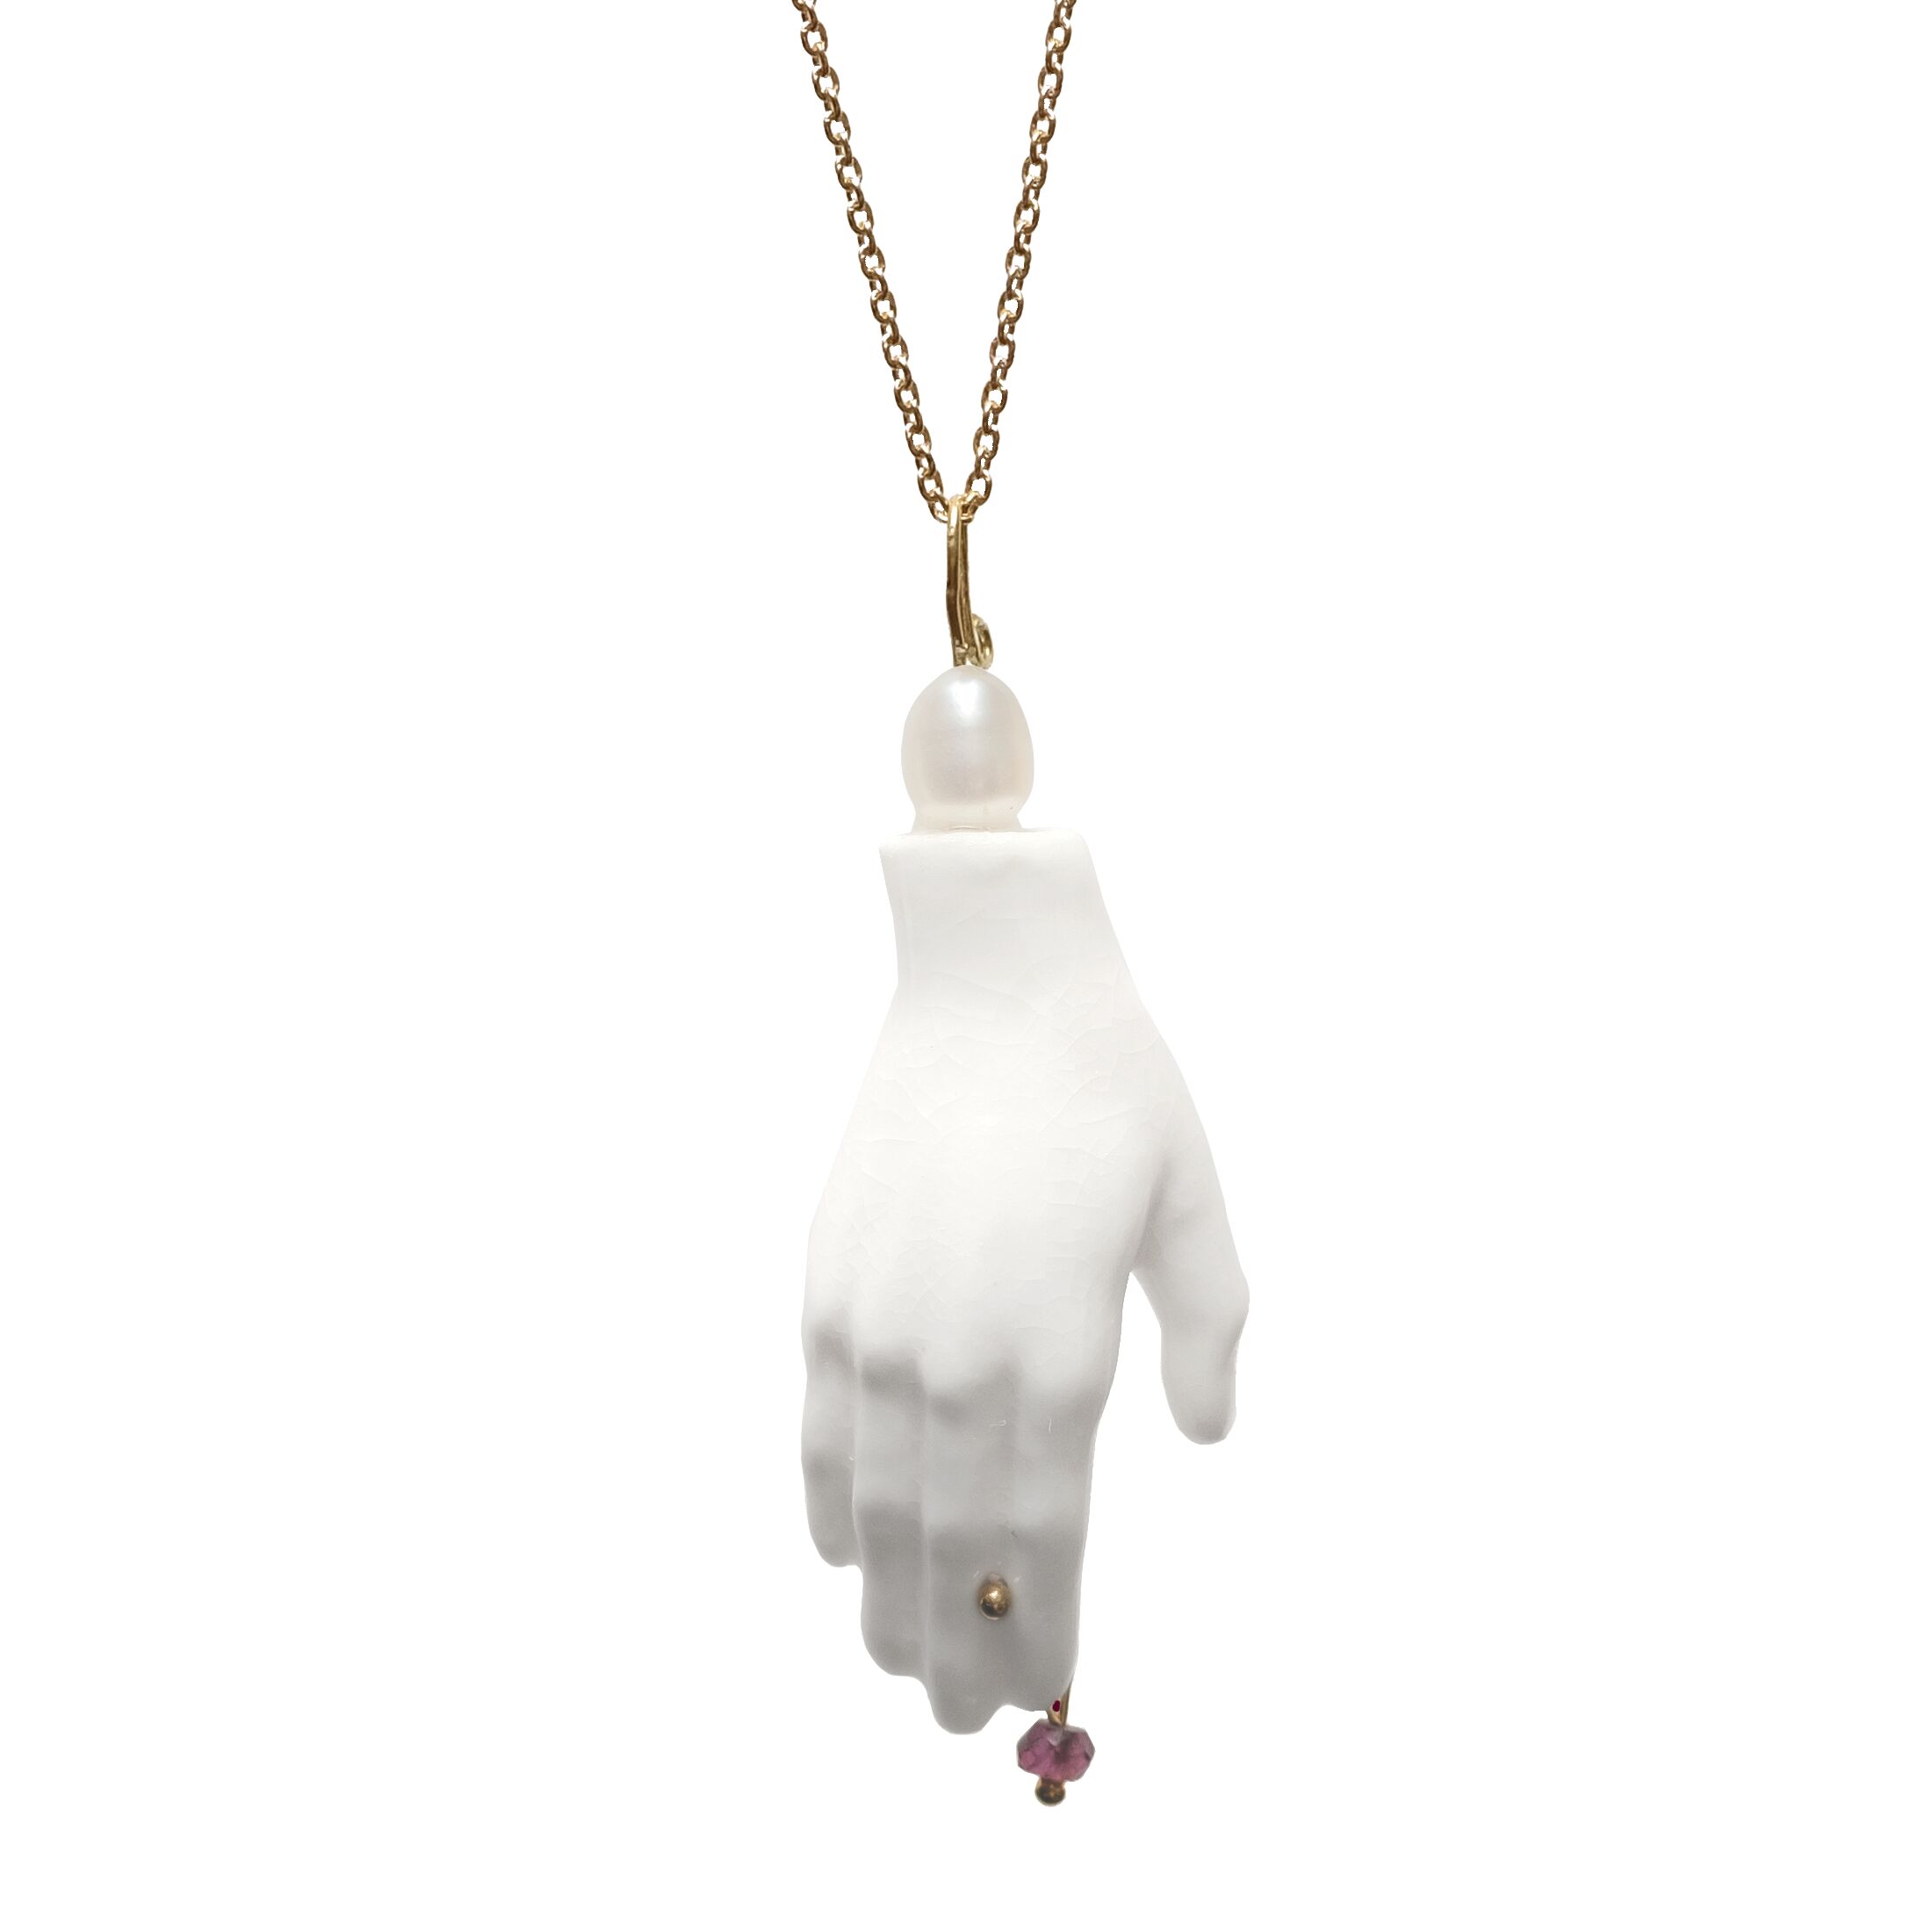 Porcelain hand pendant with garnet and faux pearl